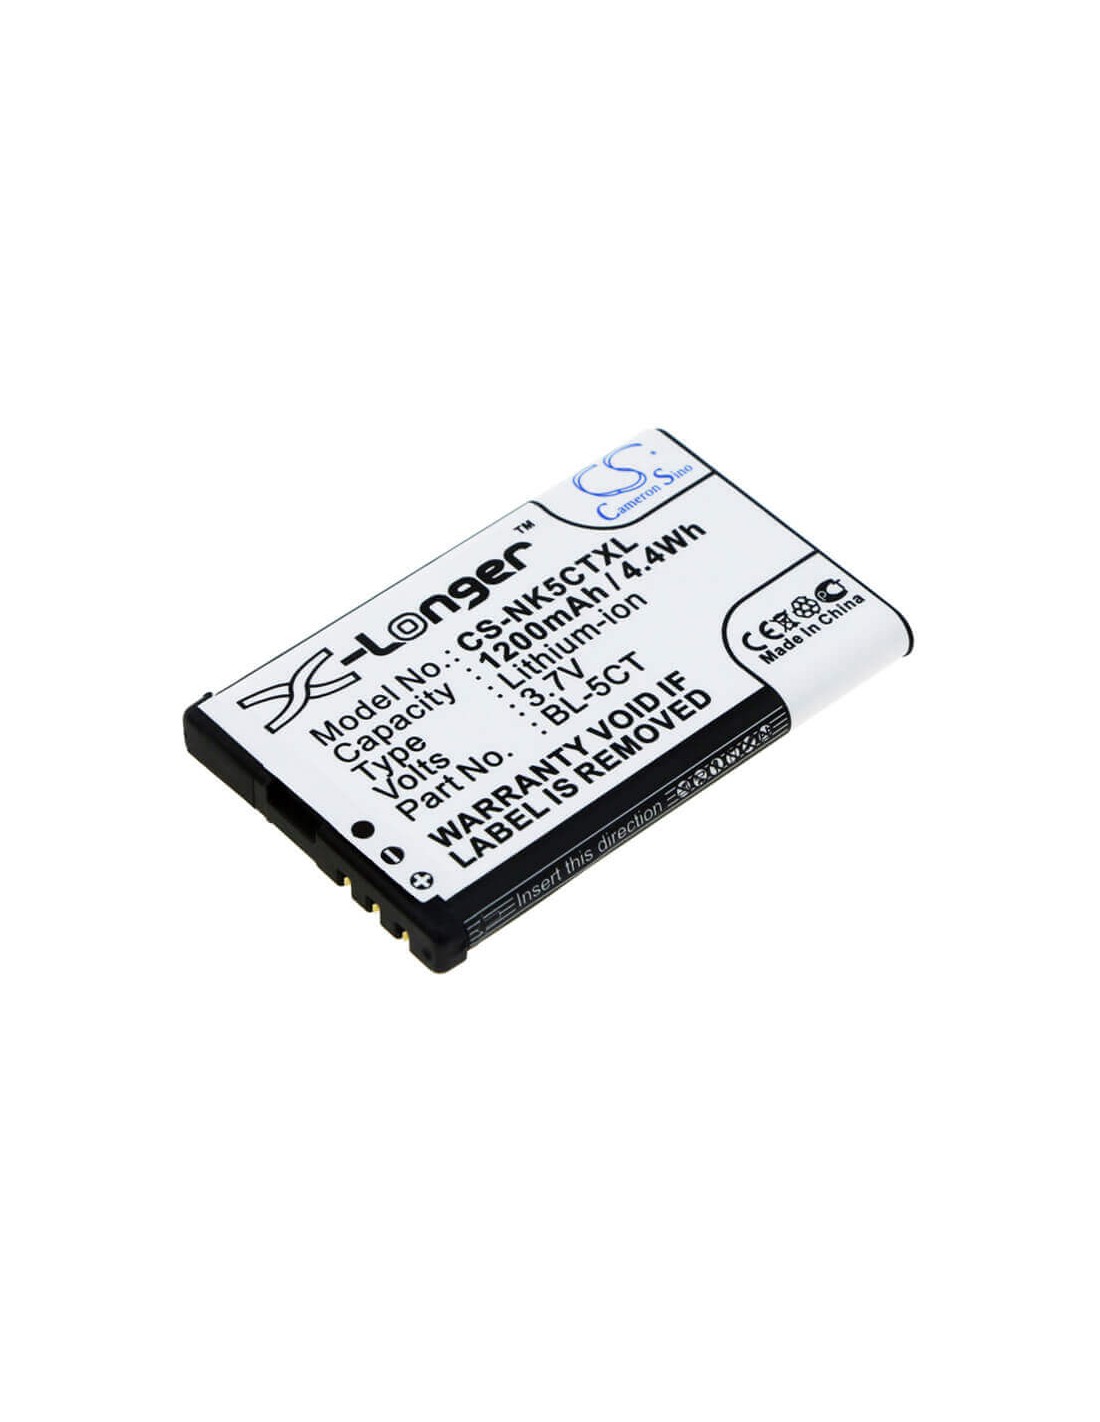 Battery for Nokia 5220 XpressMusic, 6730, 6303 classic 3.7V, 1200mAh - 4.44Wh